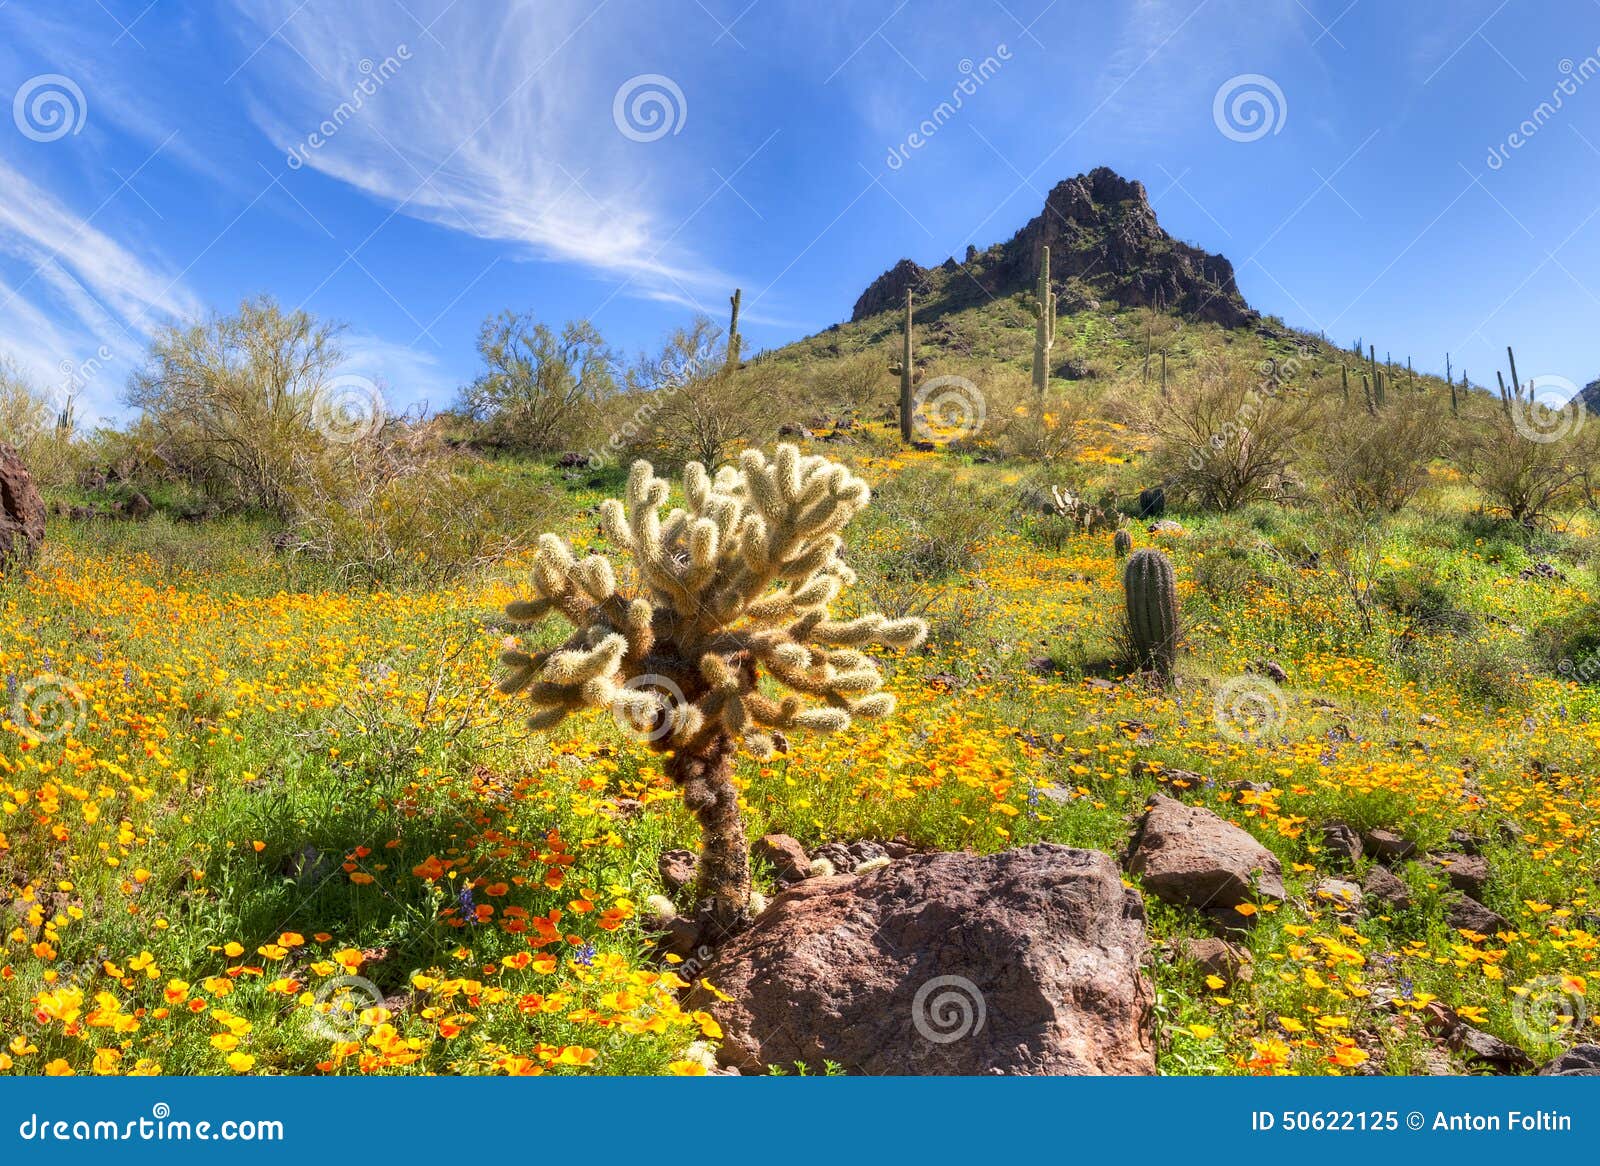 Picacho Peak State Park stock image. Image of park, mexican - 50622125